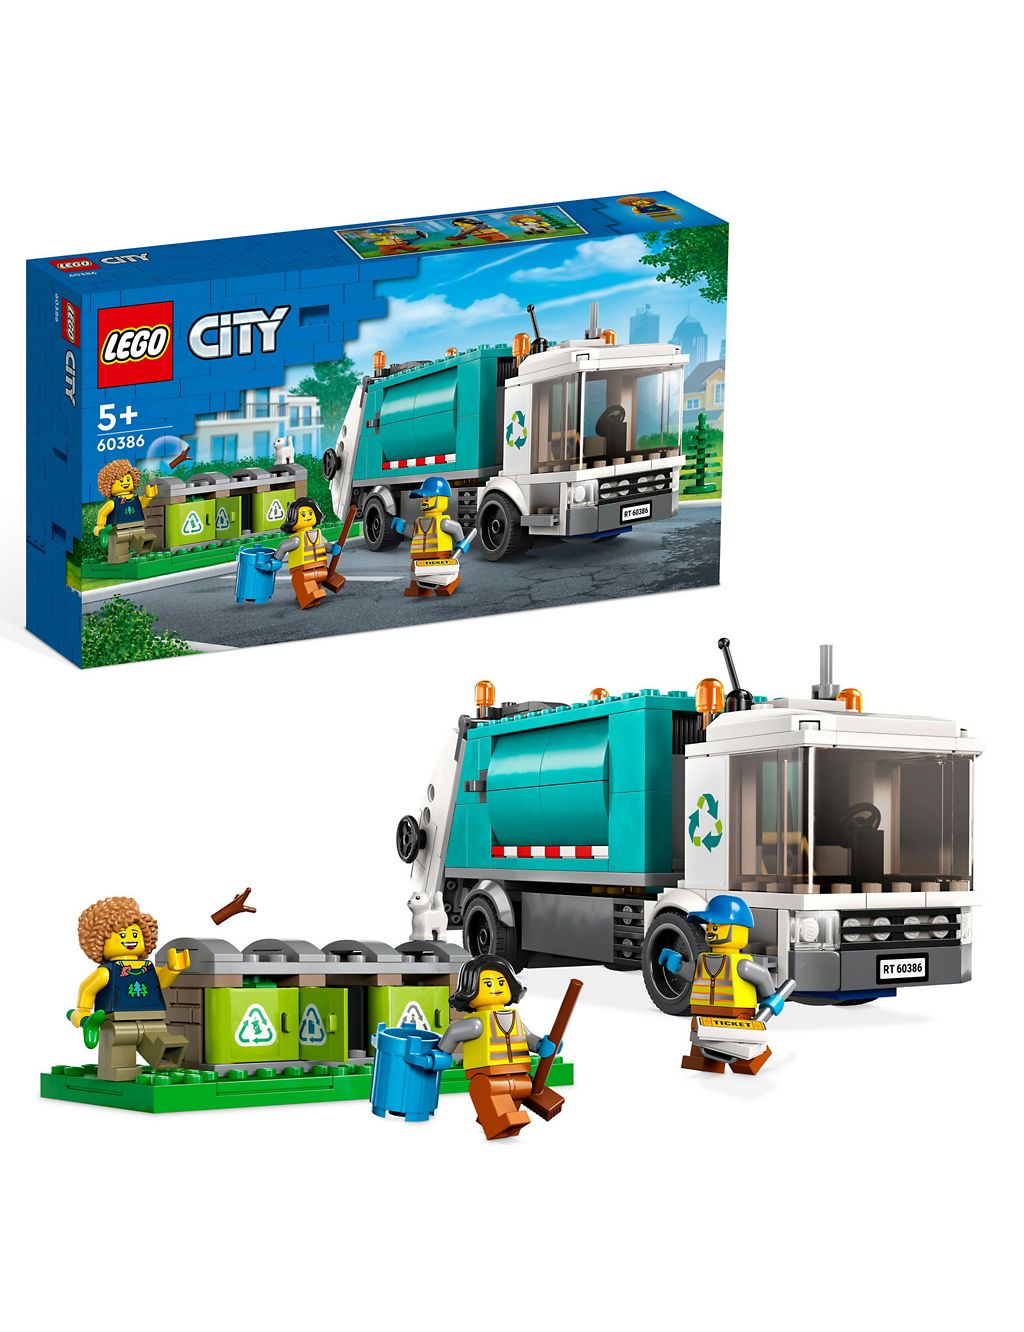 LEGO City Recycling Truck Bin Lorry Toy 60386 (5+ Yrs) 2 of 5